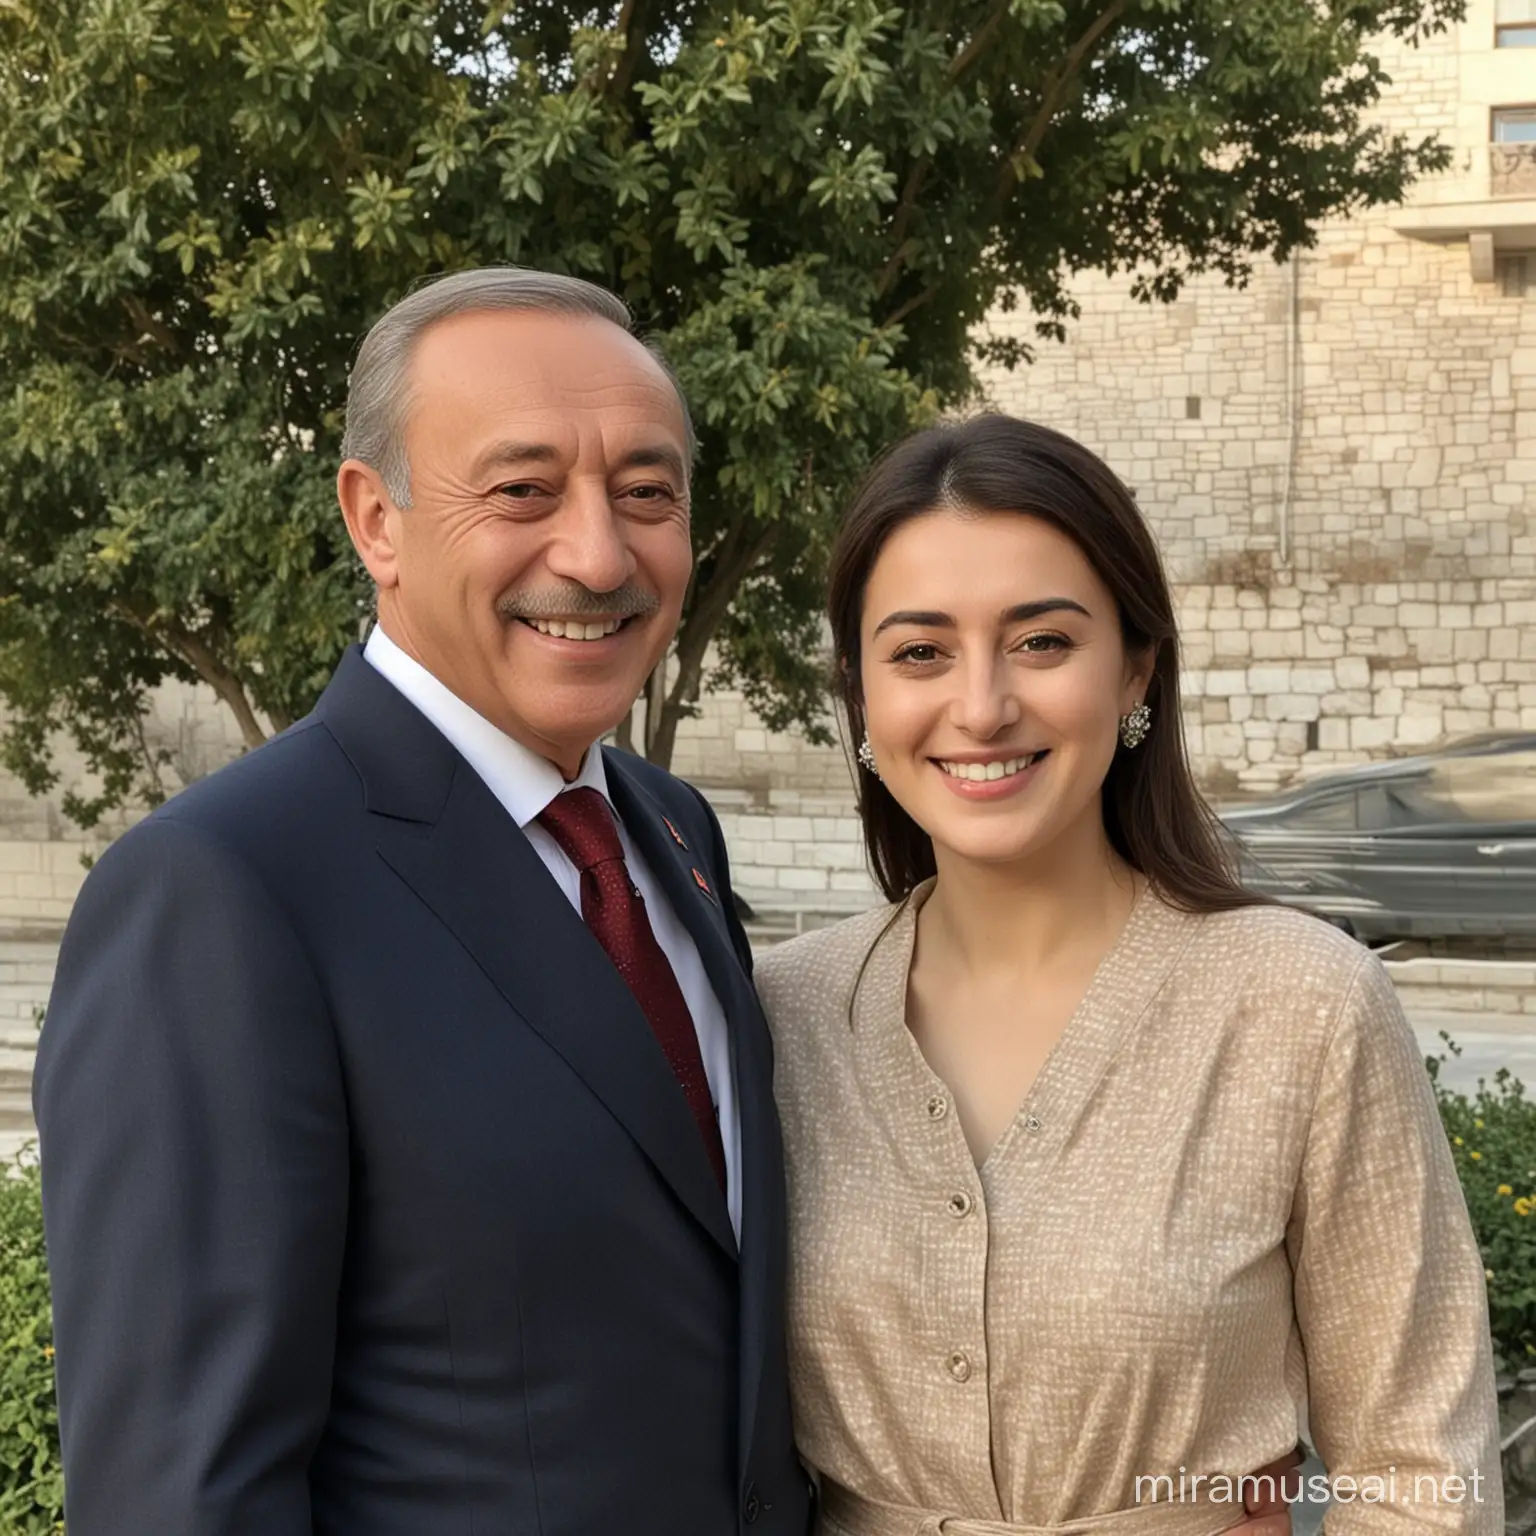 Ylmaz Erdoan and Cansu Takn Smiling Together in Unity